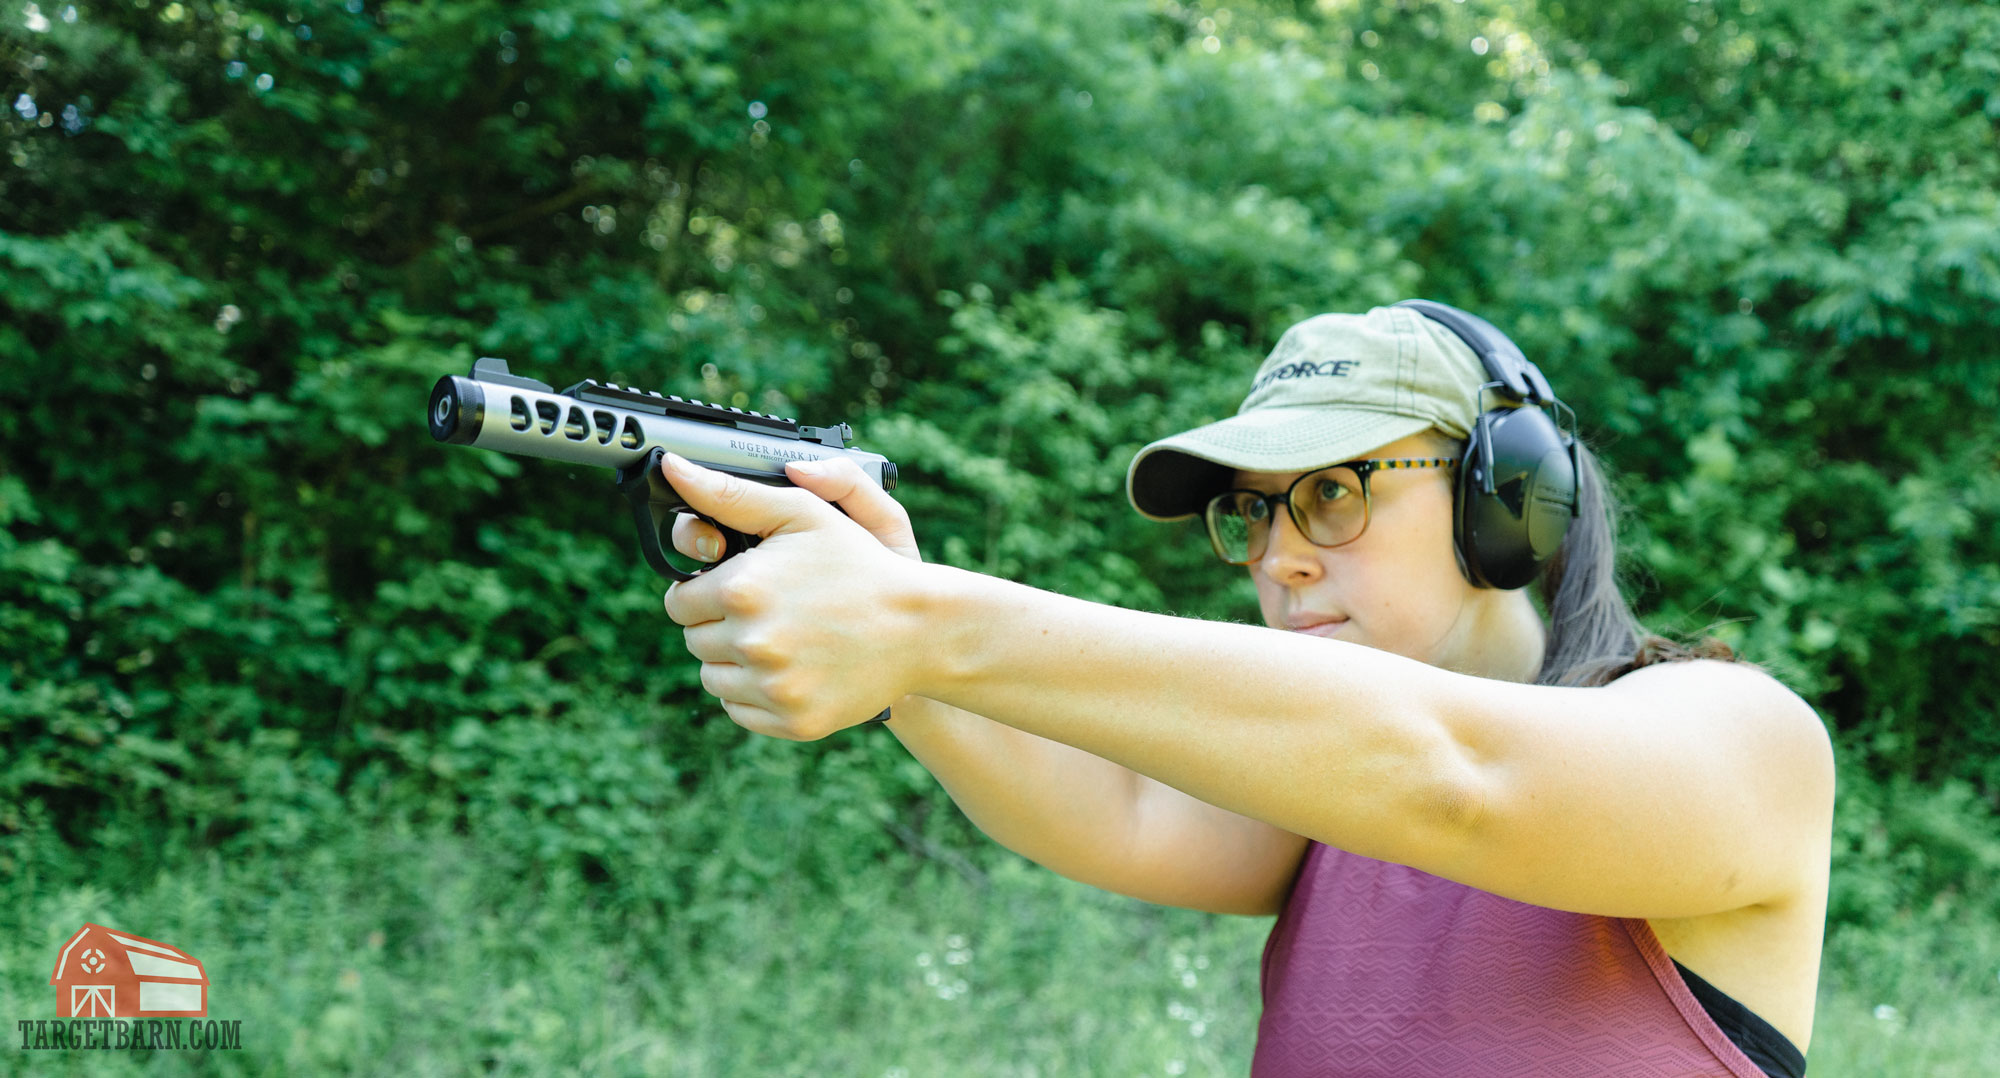 the athor shooting the 22/45 lite pistol at the range